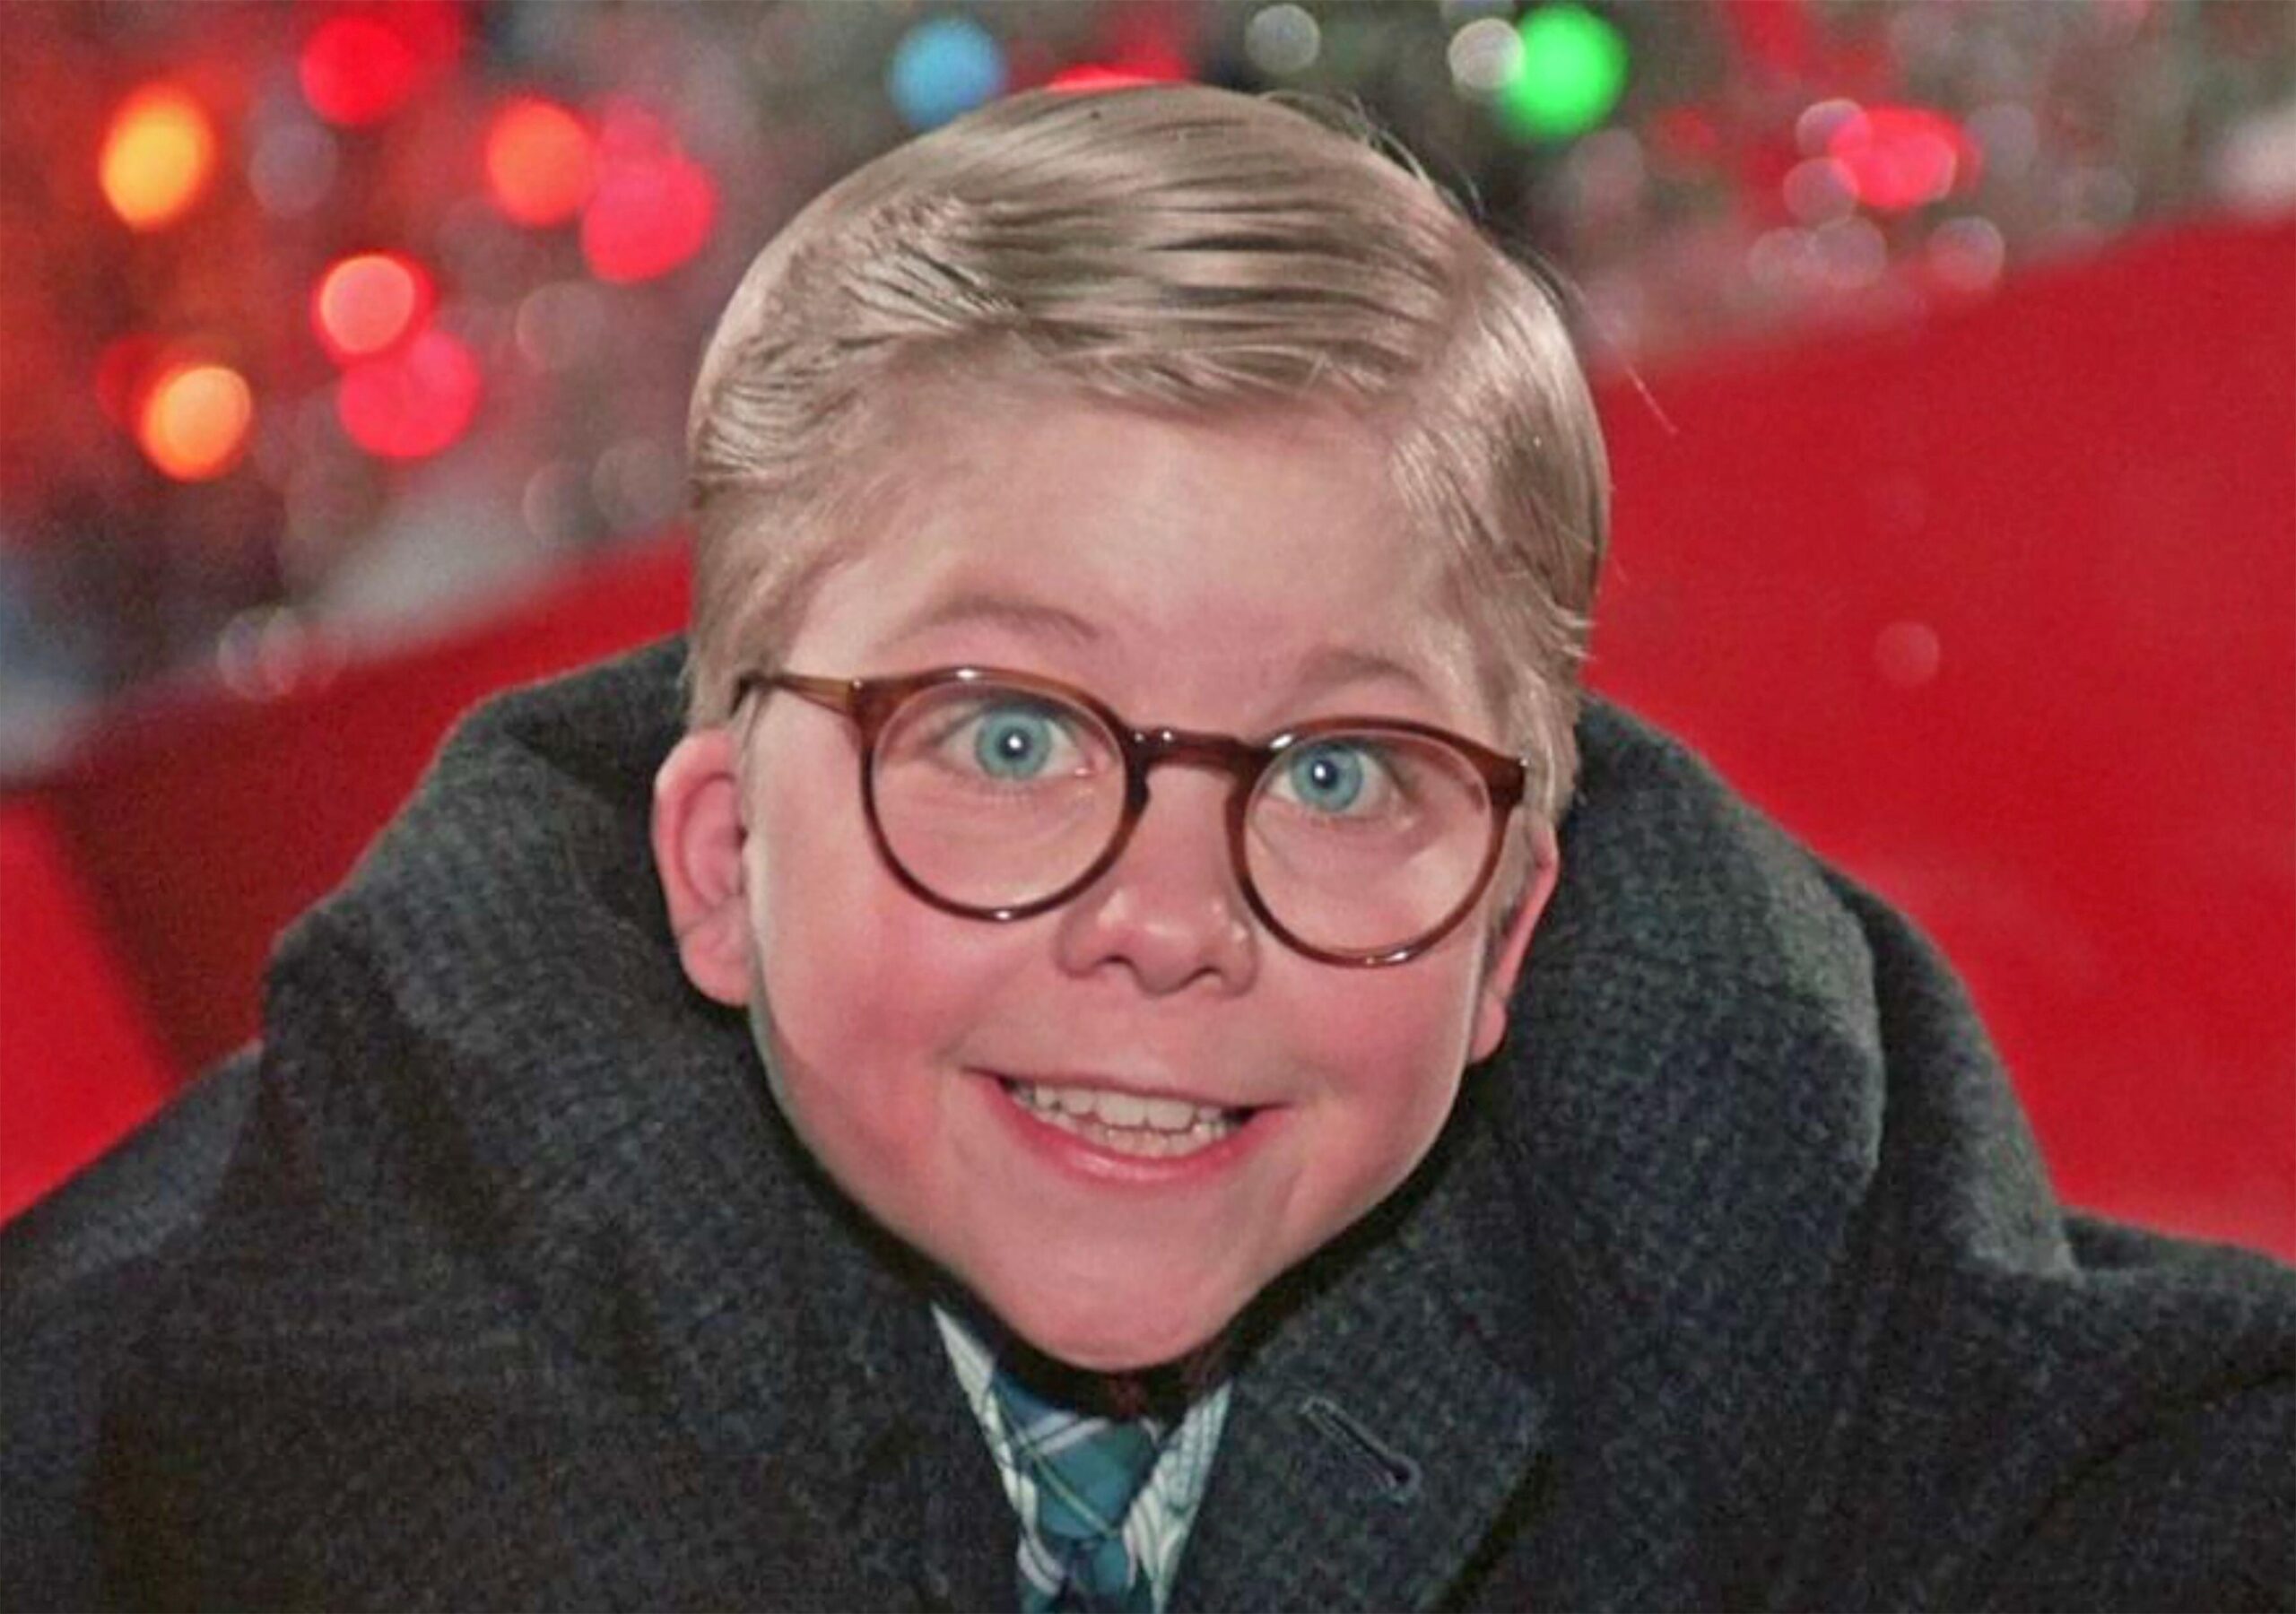 You Won’t Shoot Your Eye Out: Three Lessons in Overcoming Crucibles from A Christmas Story